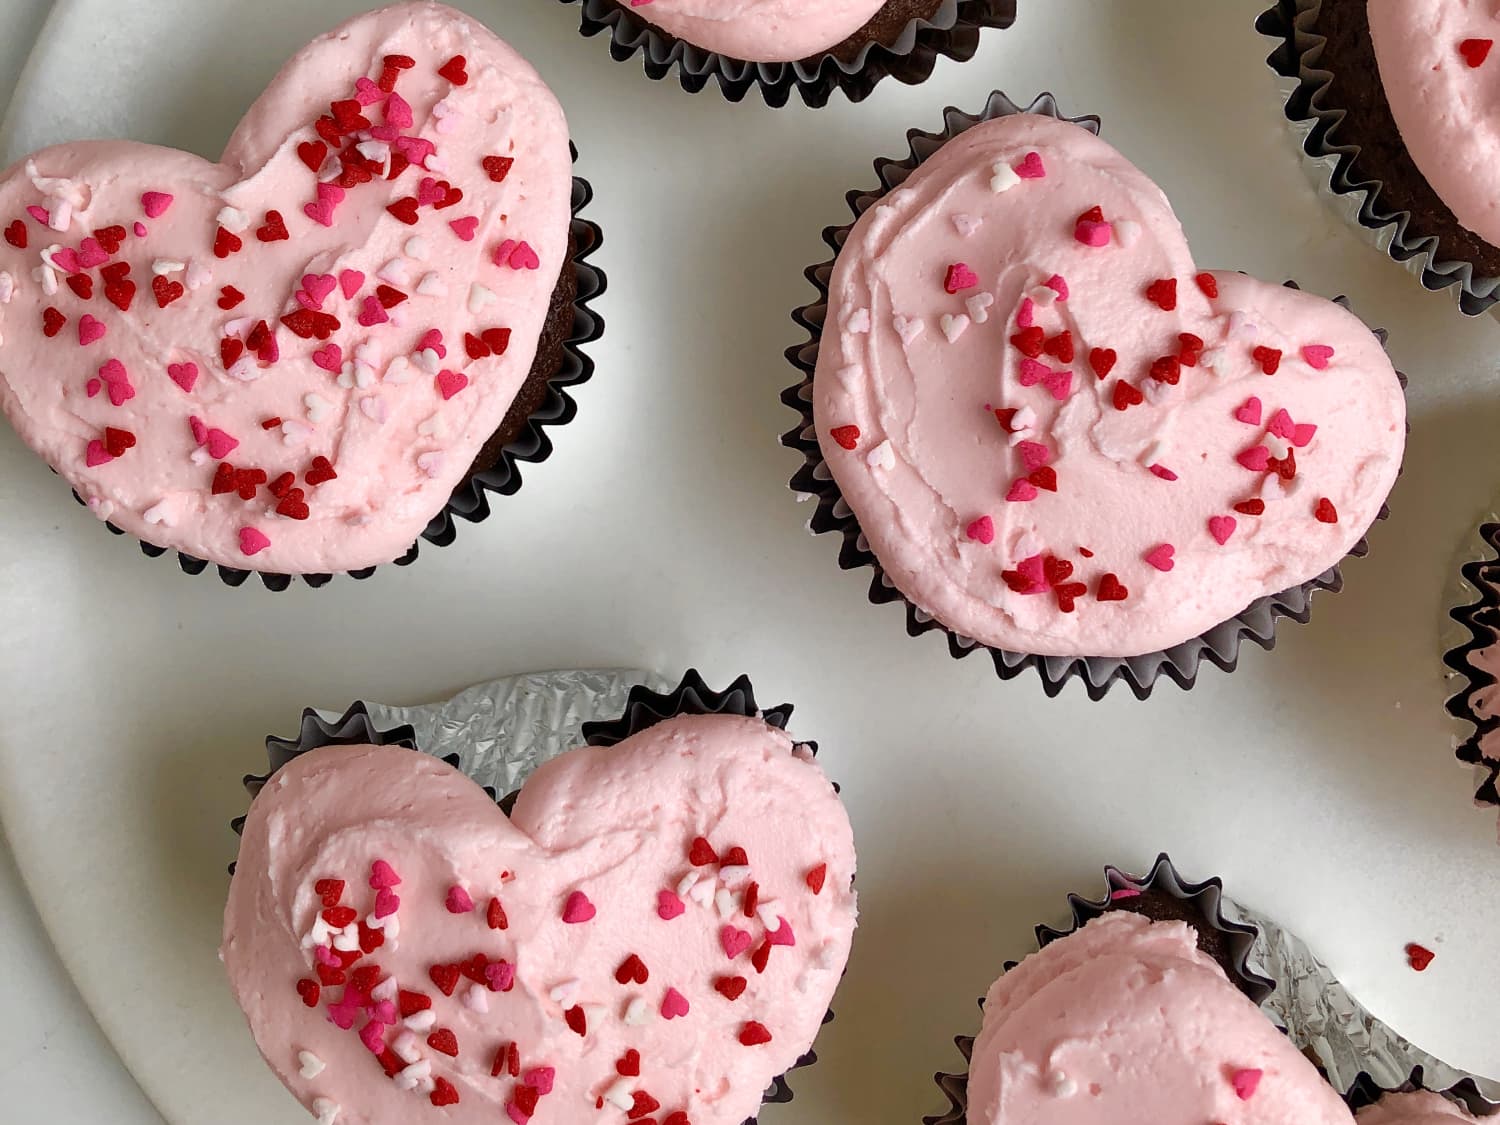 The Ingenious Hack for Making Heart-Shaped Cupcakes